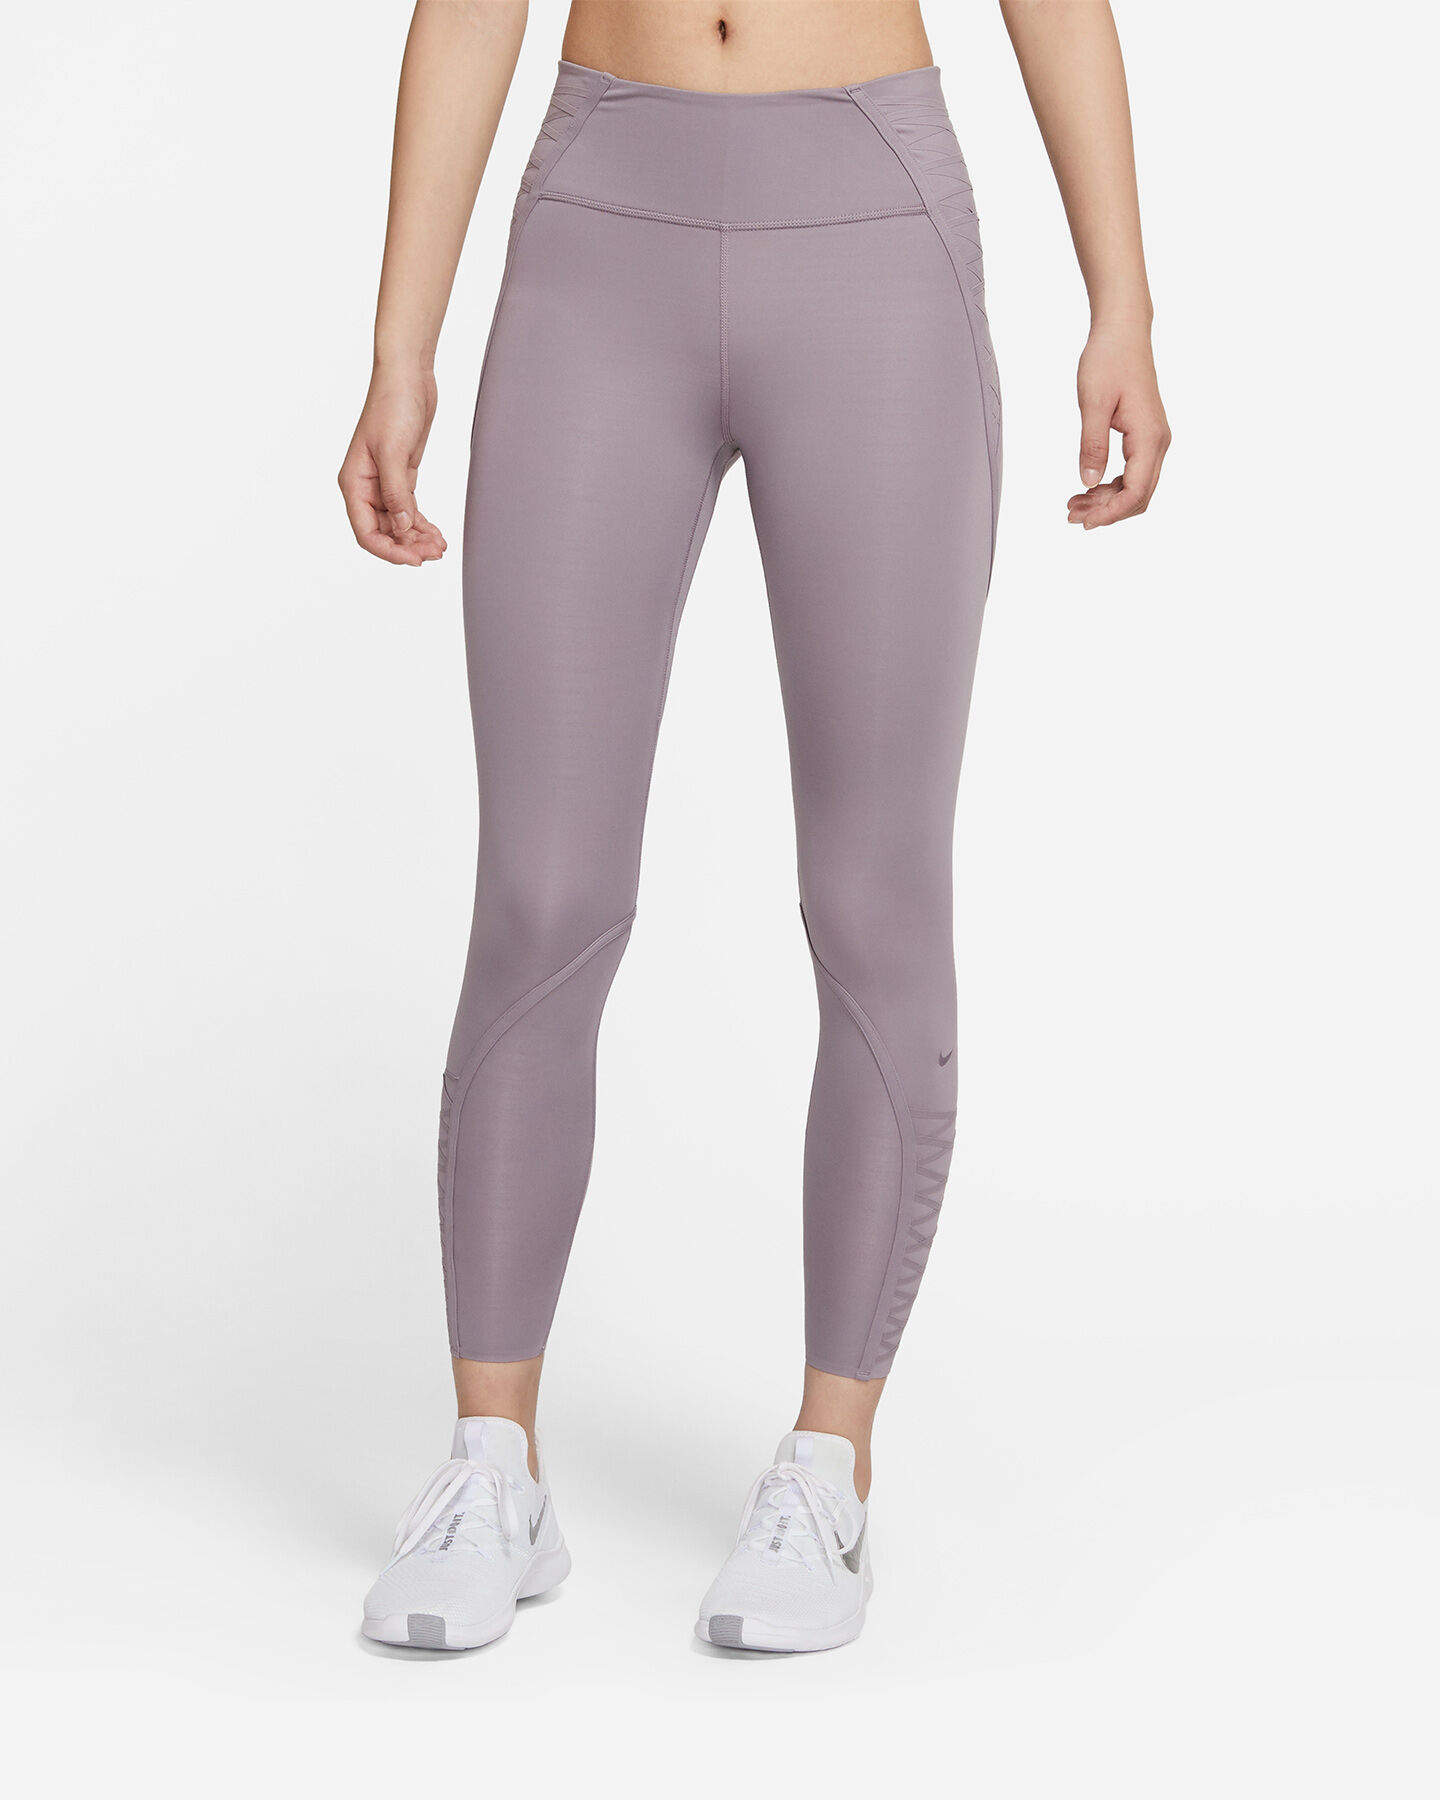  Leggings NIKE ONE LUX 7/8 W S5270517 scatto 0